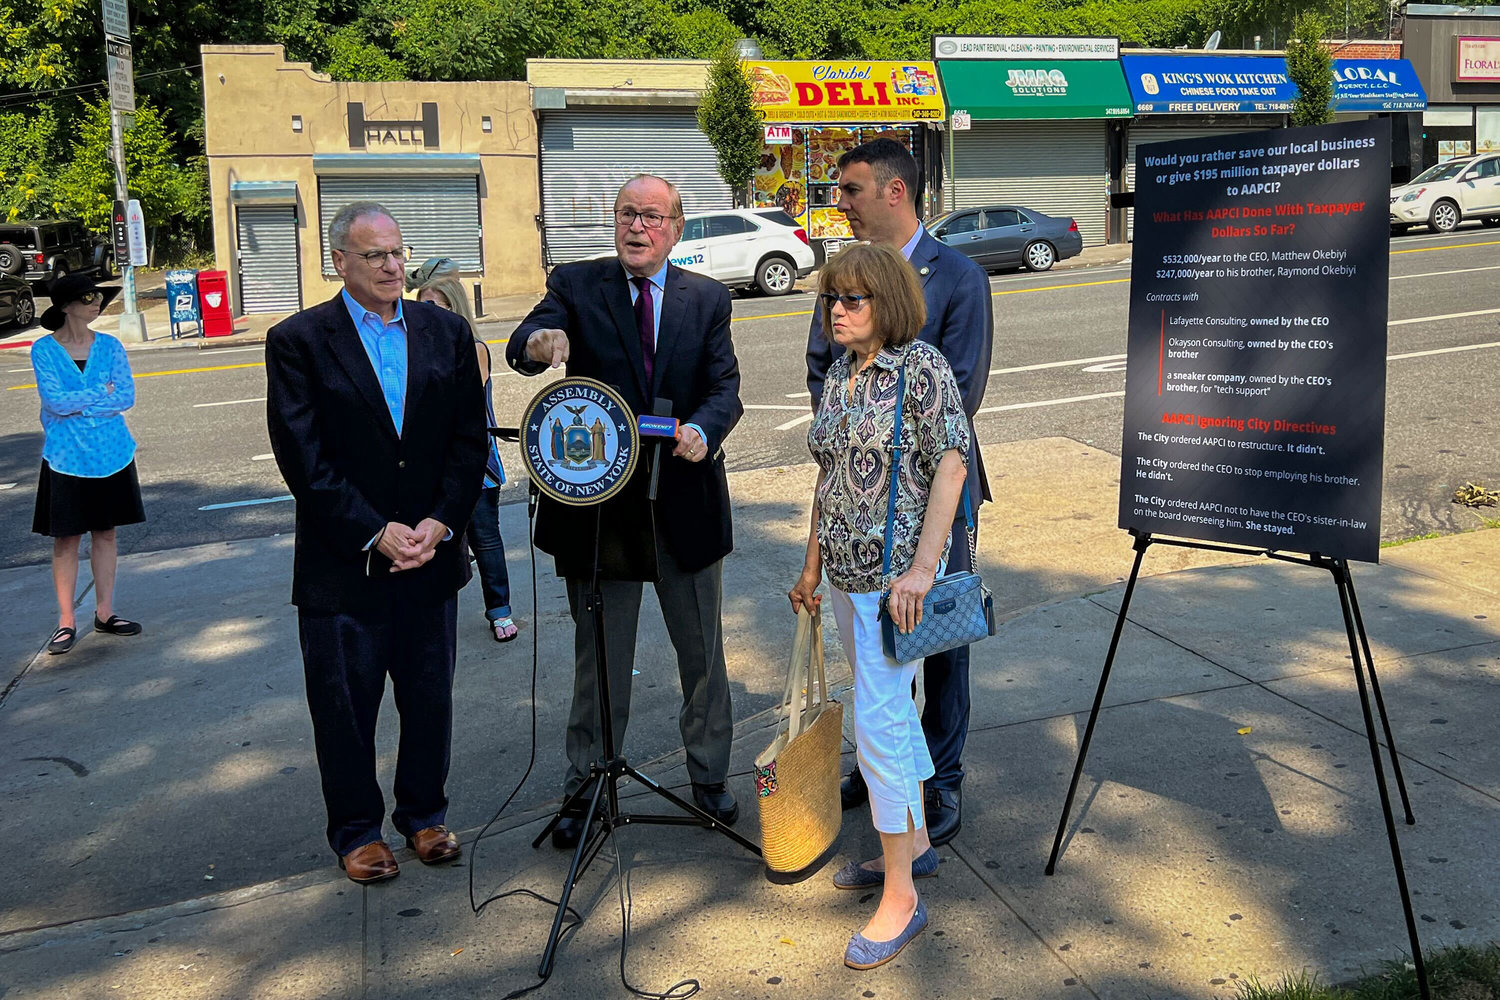 CB8 land use committee chair Chuck Moerdler speaks to the assembled crowd in front of the site of the proposed homeless men’s shelter in North Riverdale Tuesday. CB8 chair Laura Spalter, Assemblyman Jeffrey Dinowitz and City Councilman Eric Dinowitz also voiced their concerns.